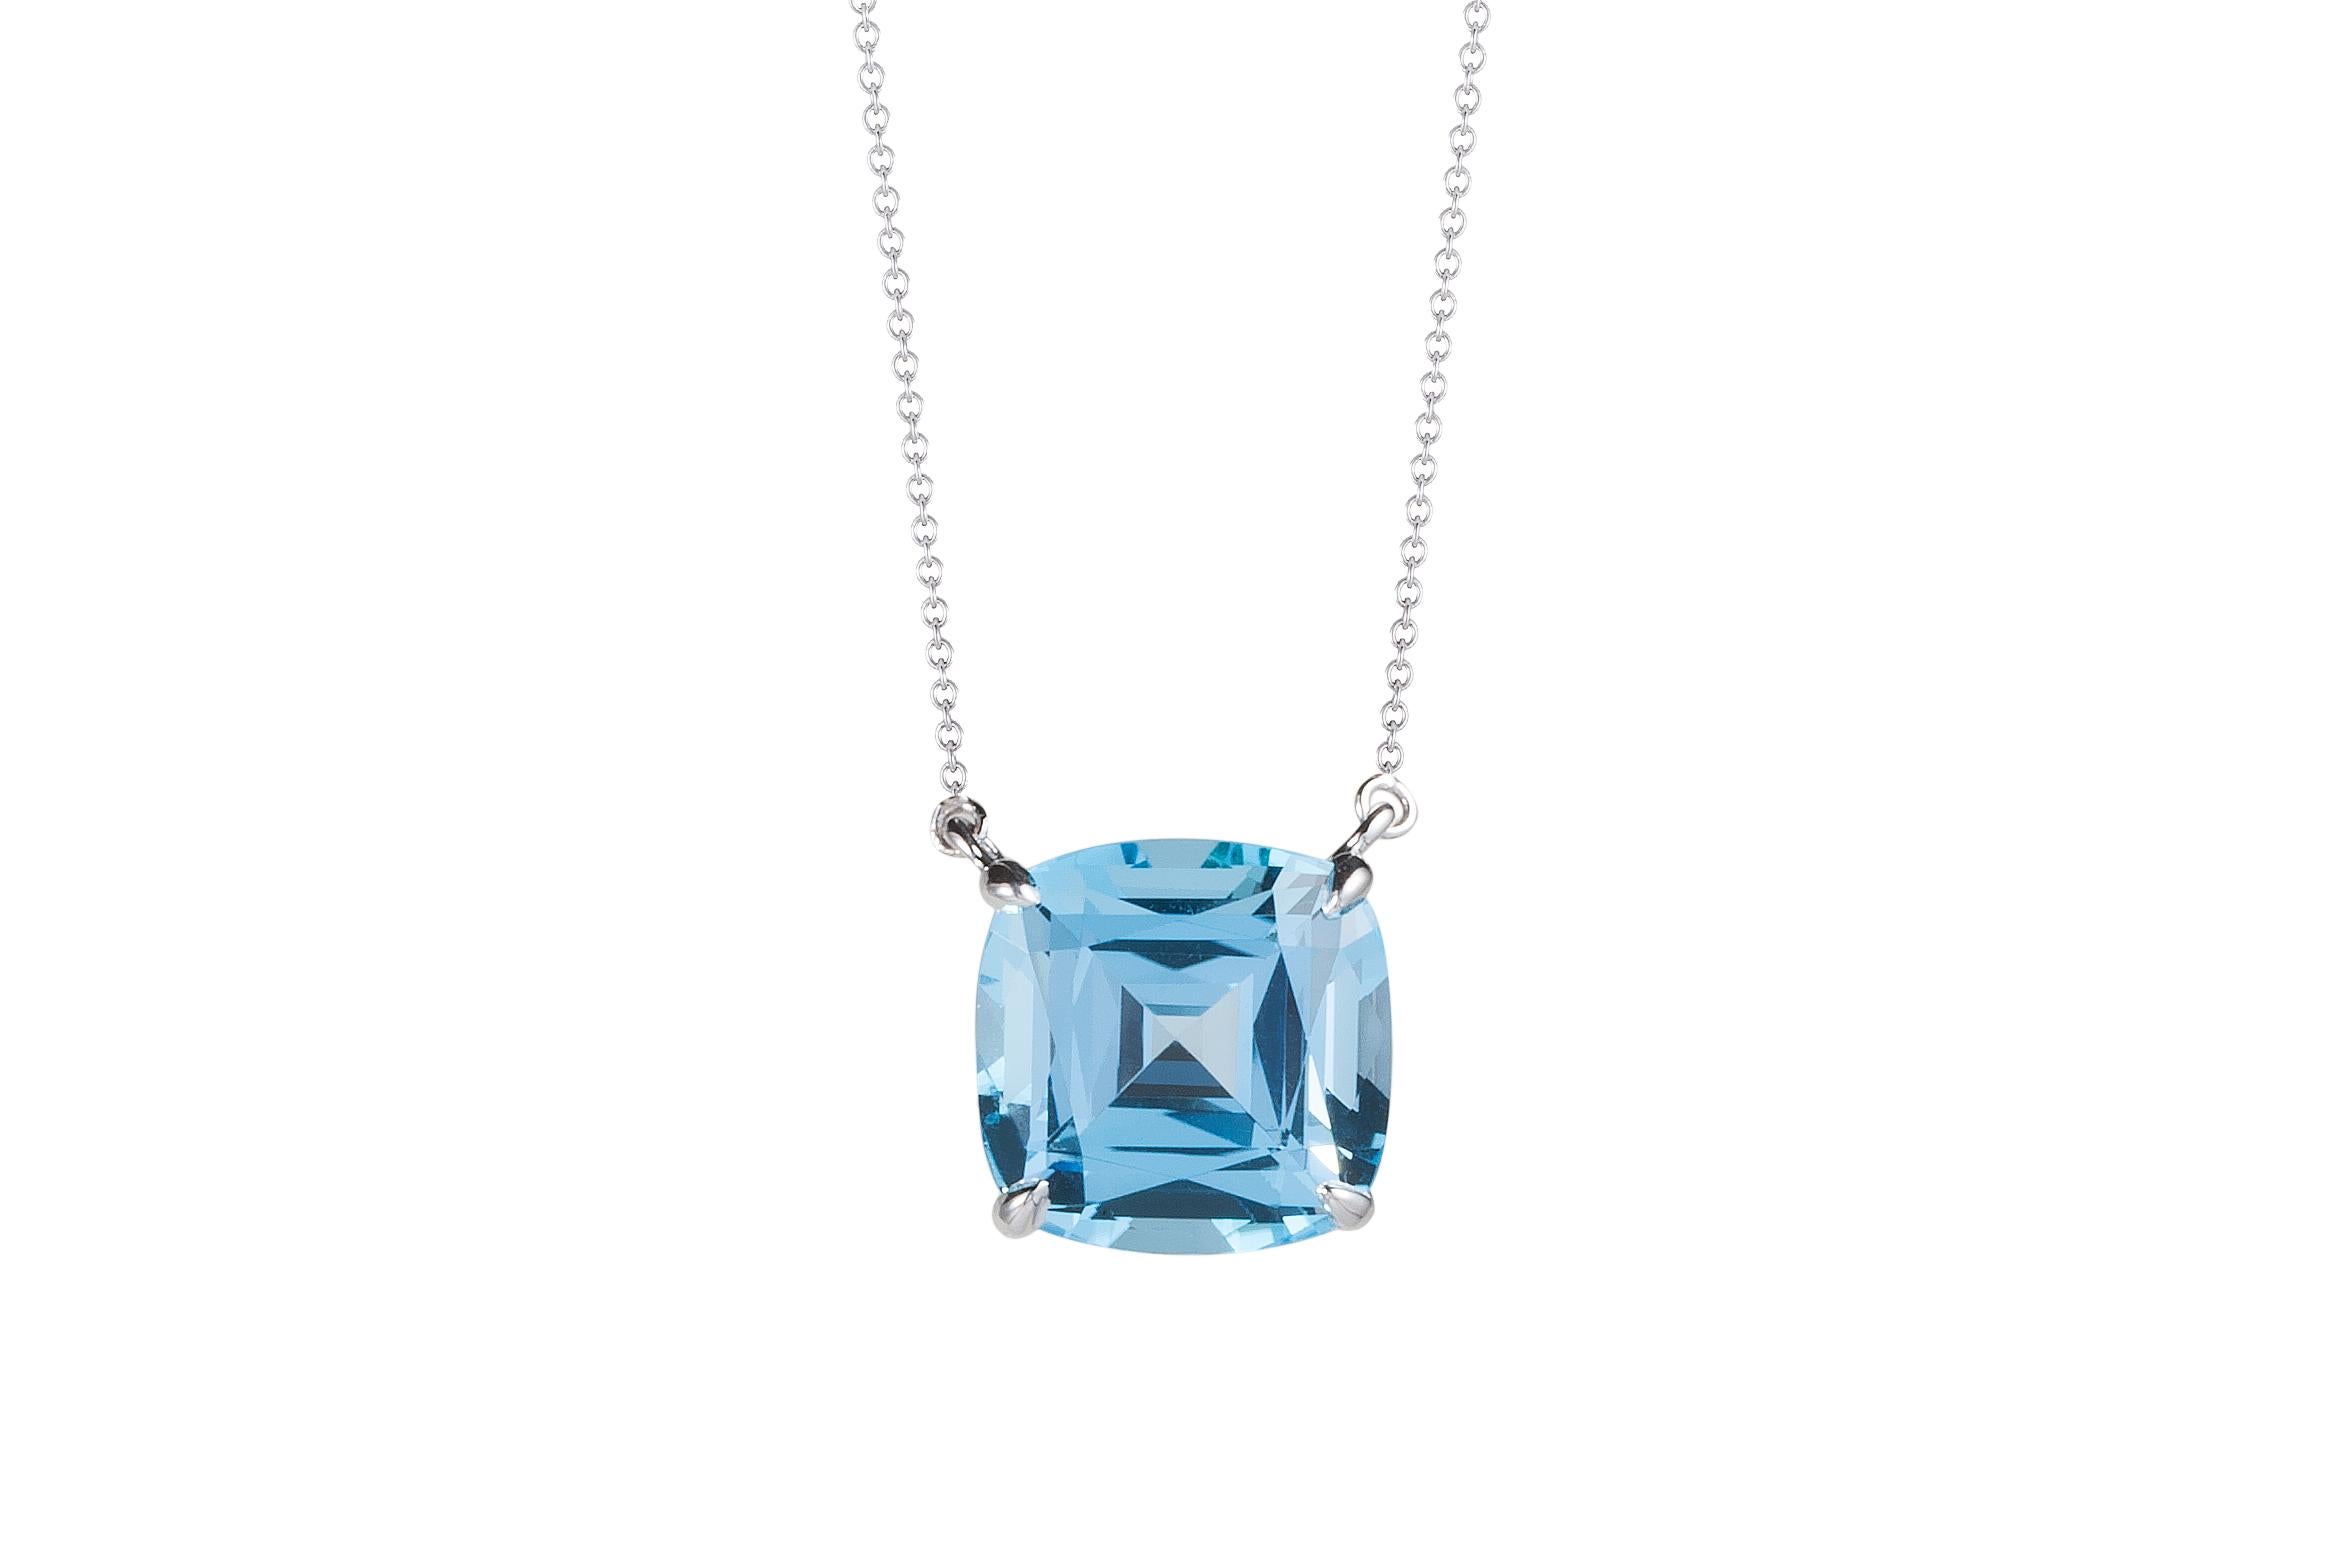 Blue Topaz Cushion Pendant on Cable Chain in 18K White Gold, from ‘Gossip' Collection 
Stone Size: 14 x 14 mm 
Gemstone Approx. Wt: Blue Topaz- 11.20 Carats